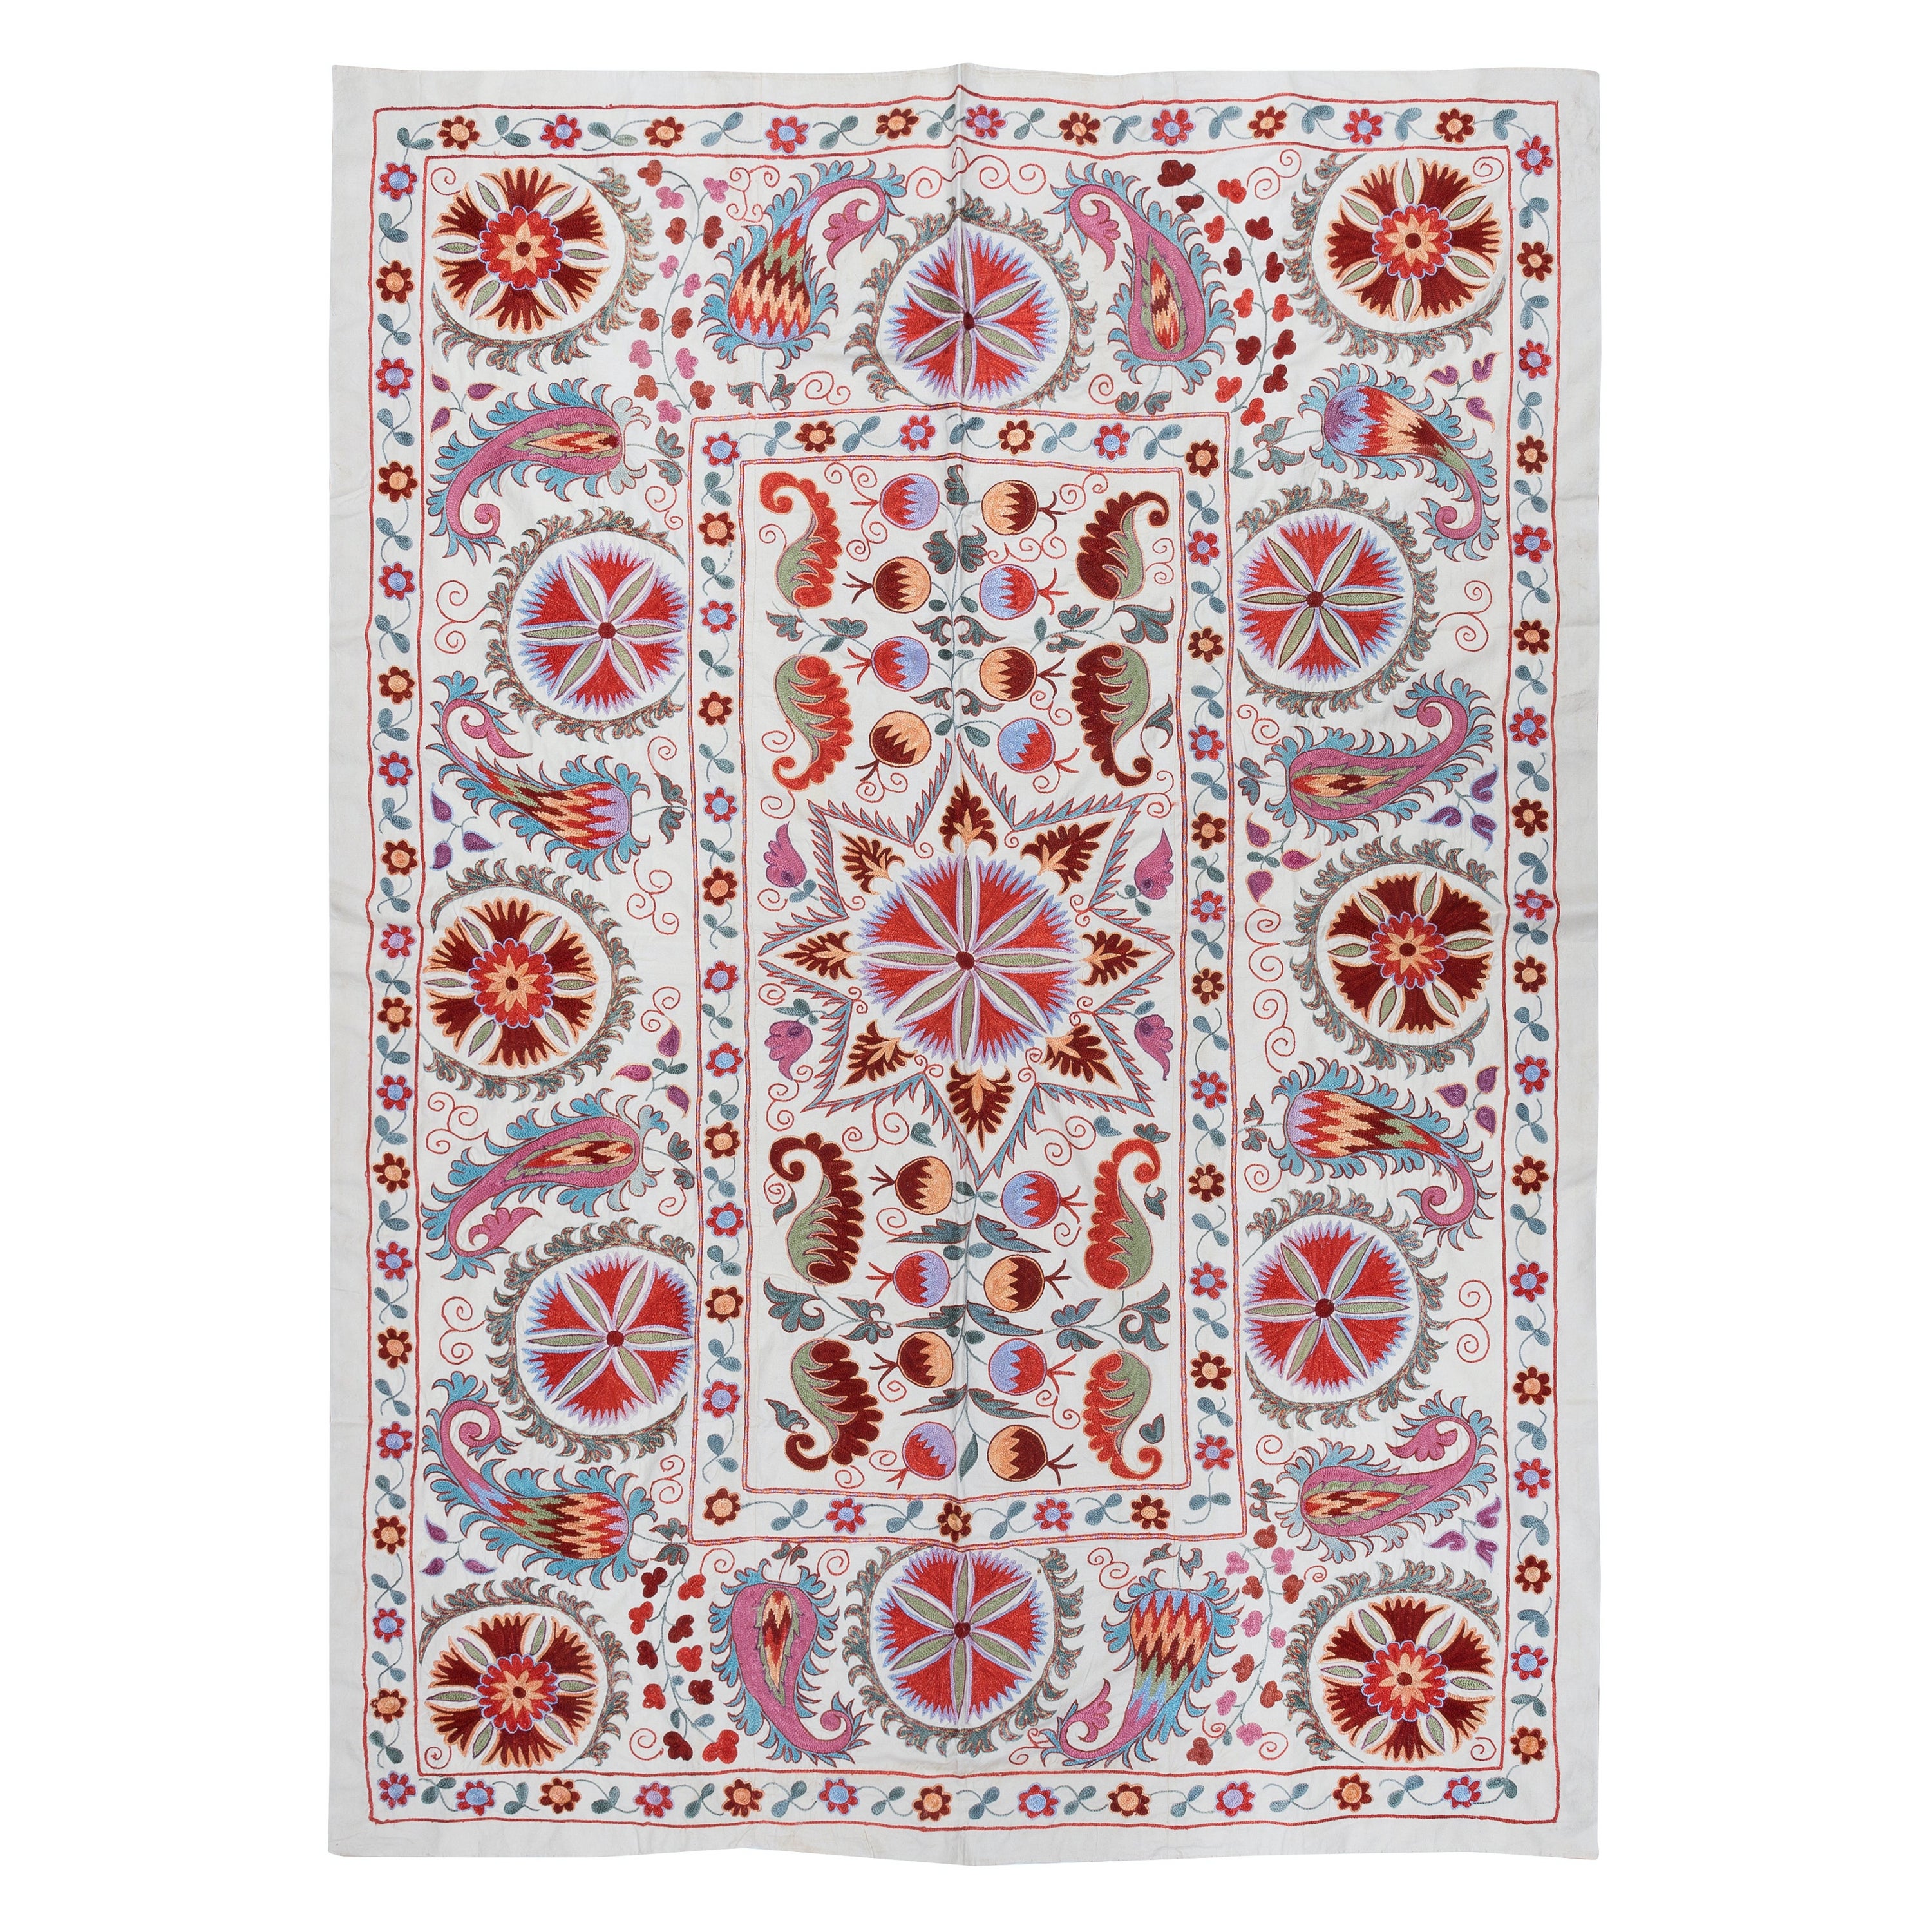 5x6.9 ft Uzbek Suzani Fabric Bed Cover, Embroidered Silk and Cotton Wall Hanging For Sale